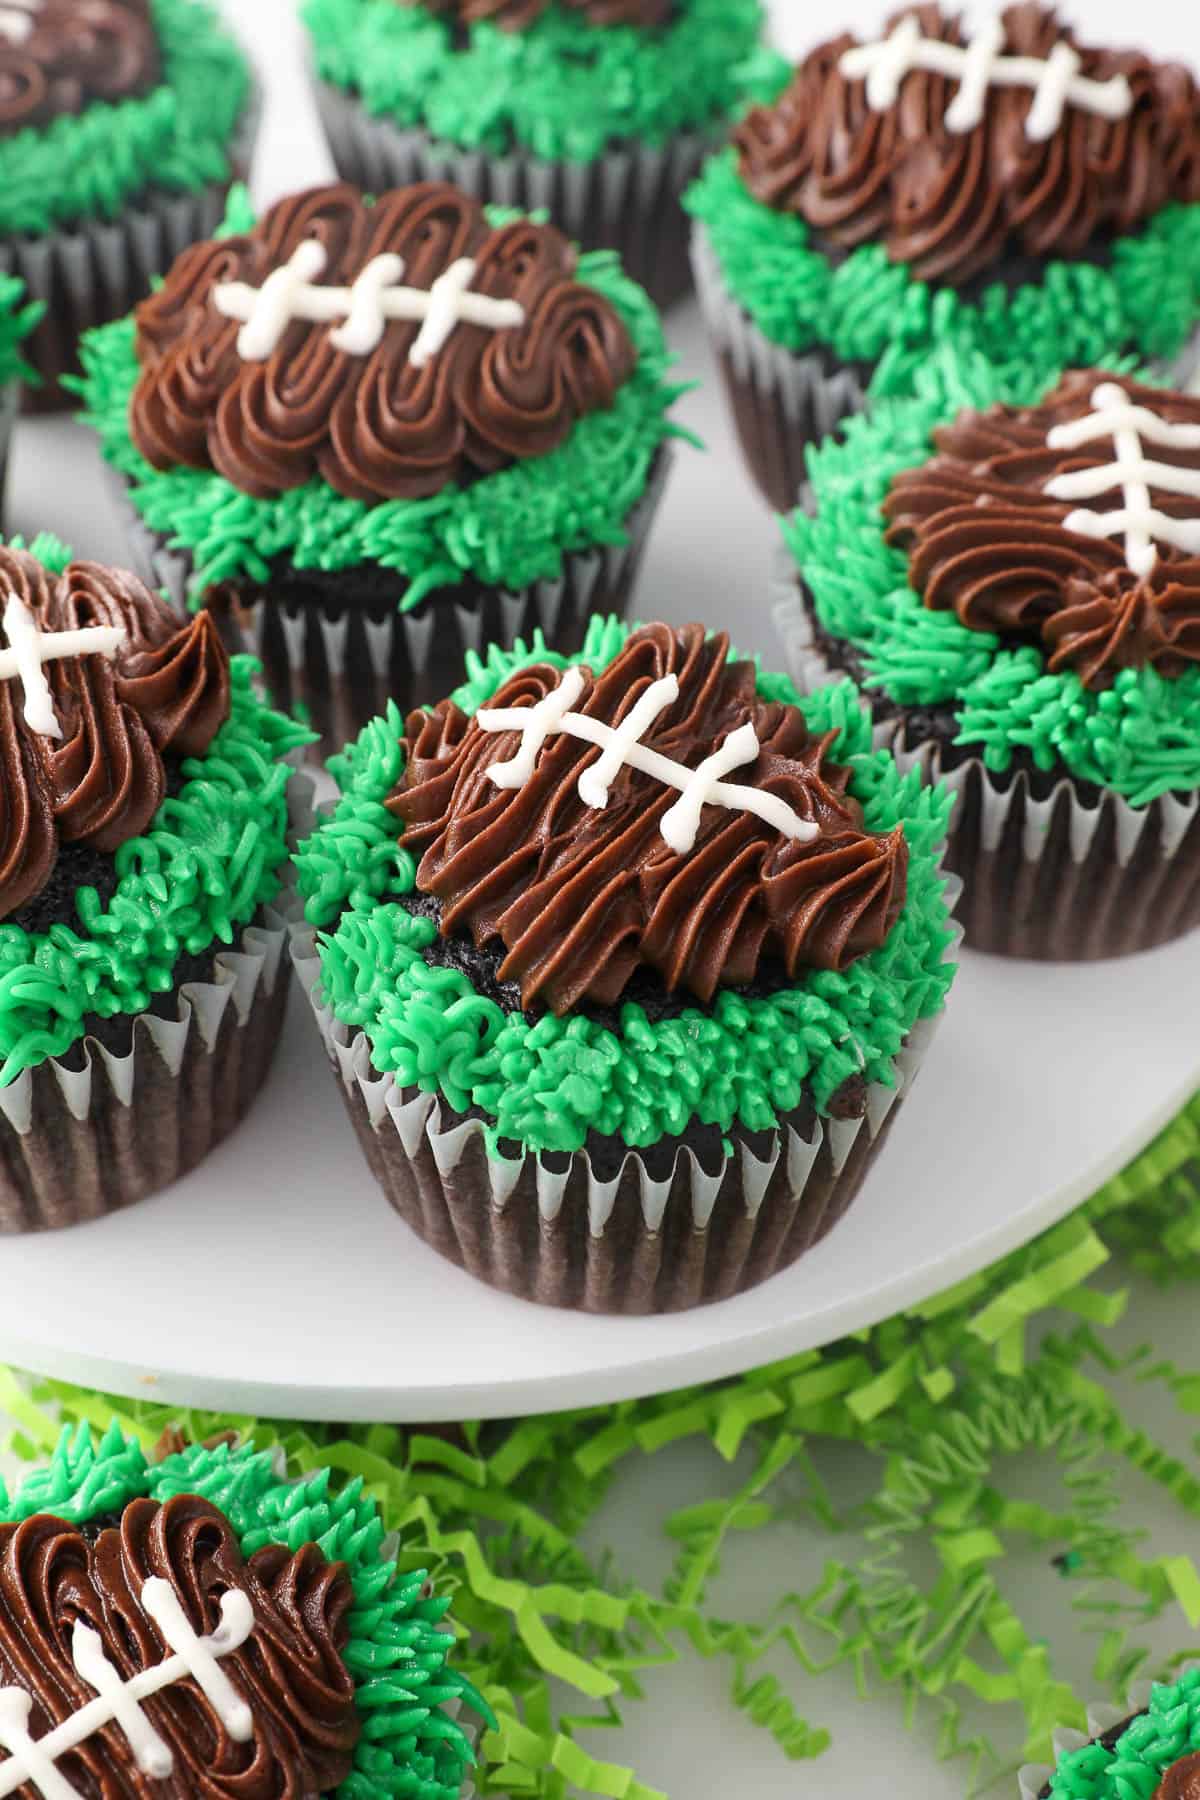 Football cupcakes arranges on a cake stand.